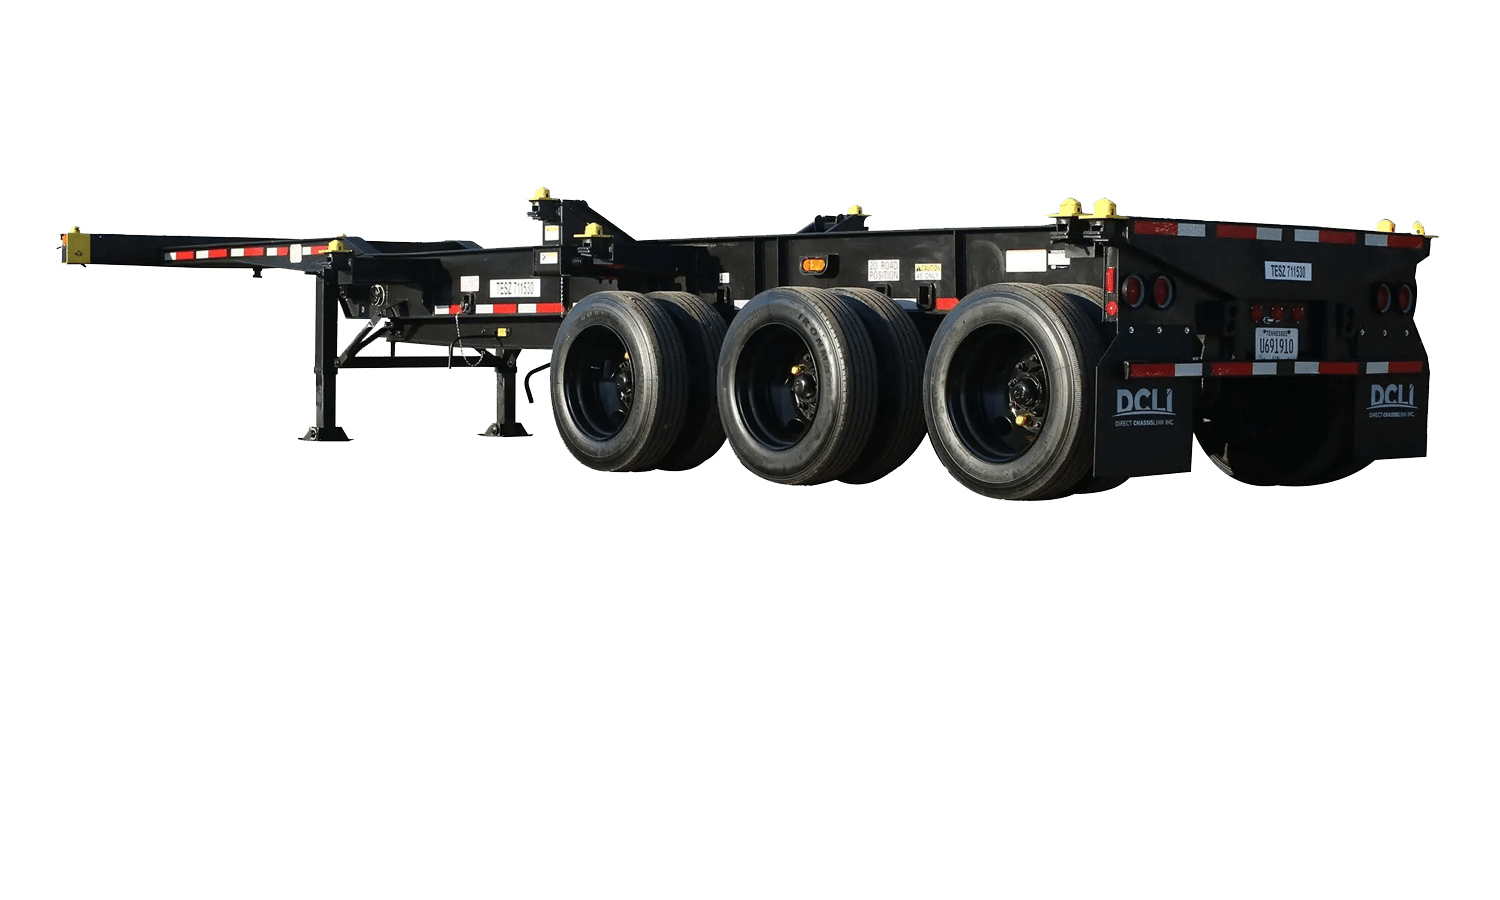 Triaxle anysizer chassis back view